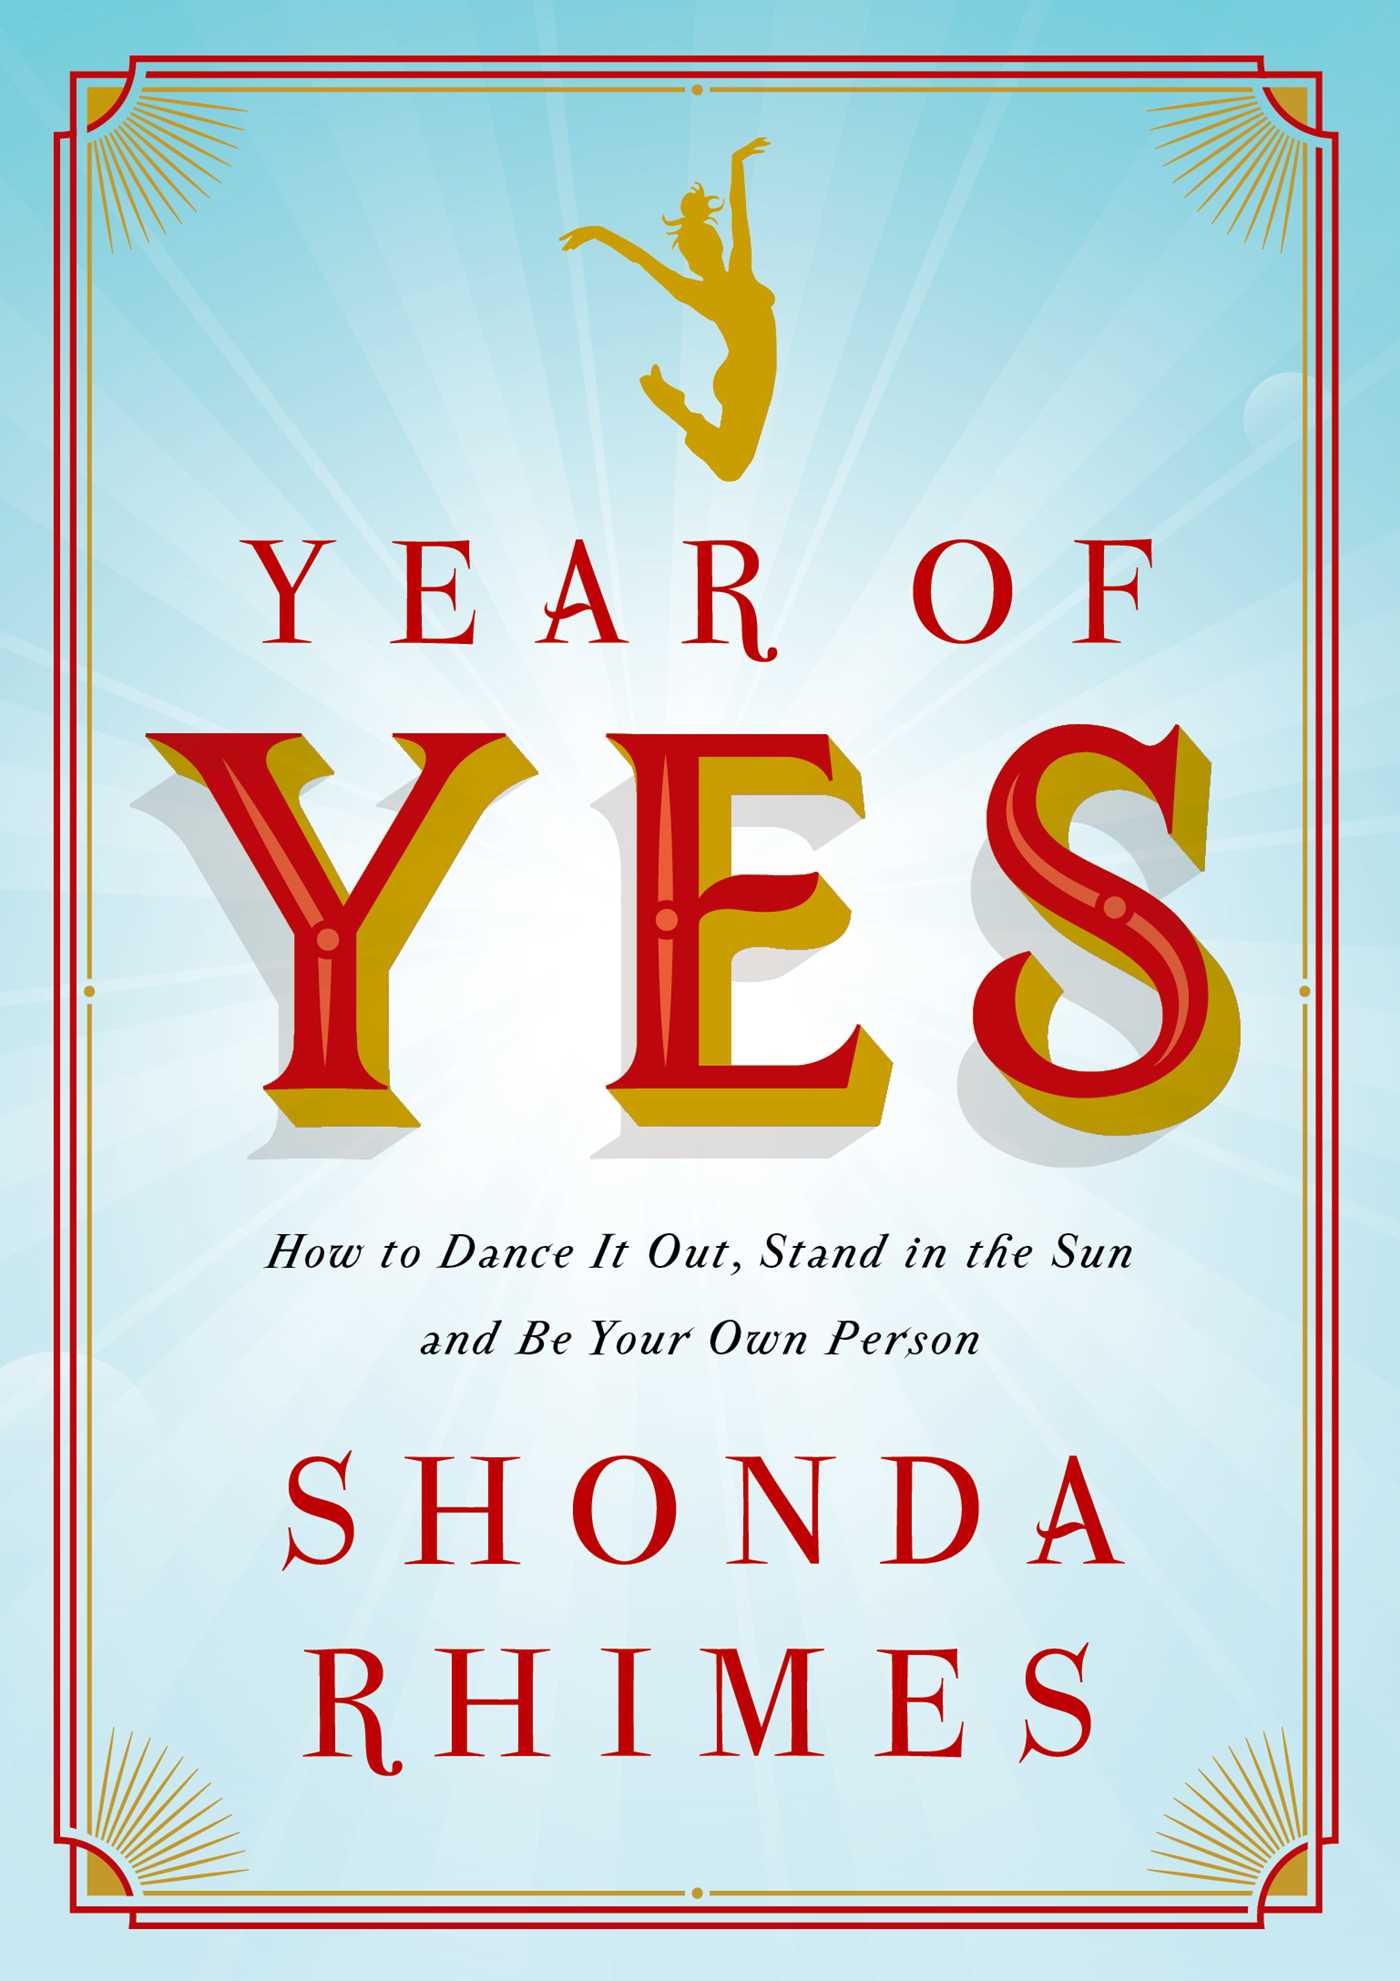 Shonda's Rules: 5 Things Shonda Rhimes Discovered by Saying 'Yes'
